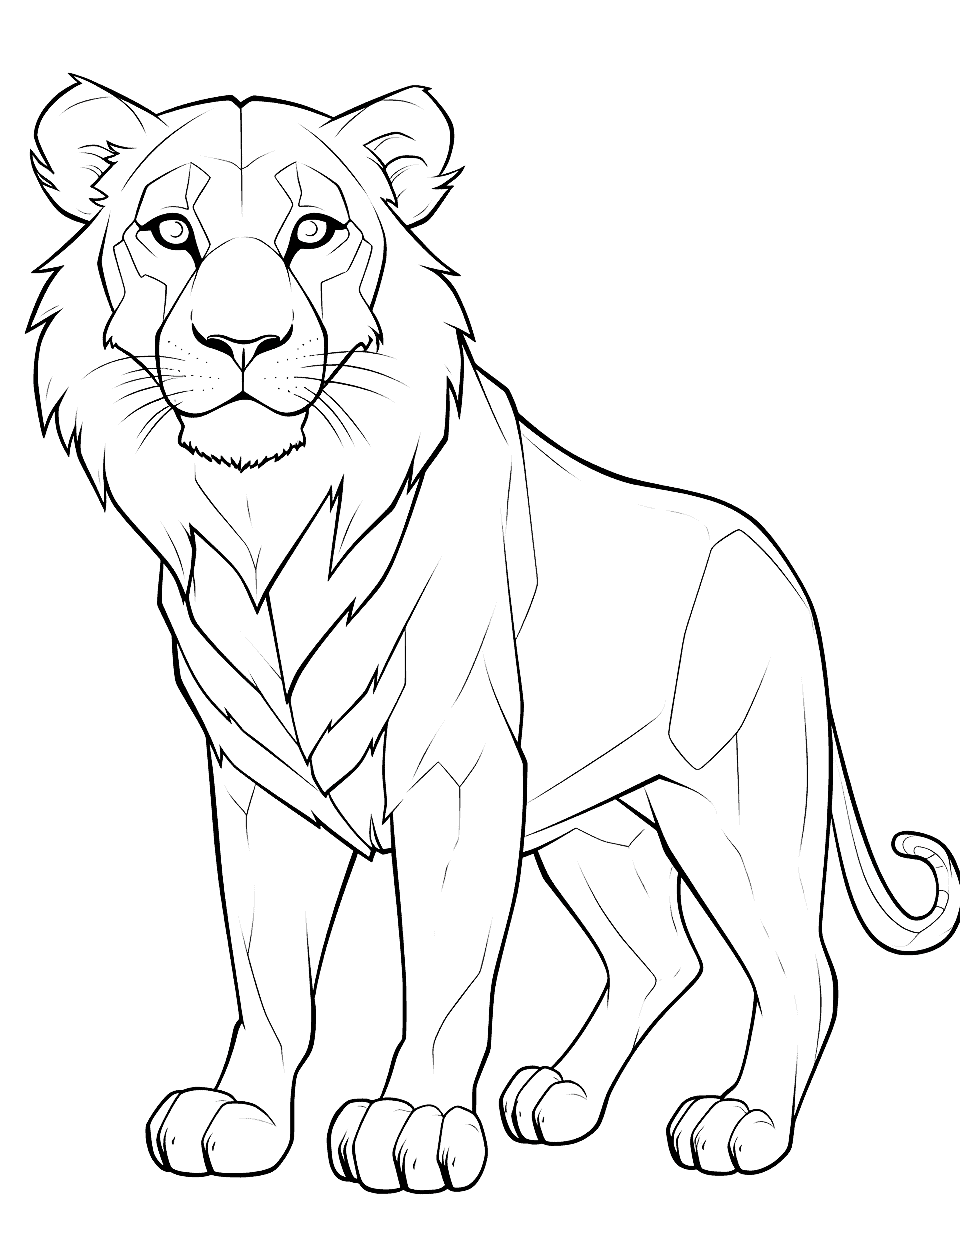 Animal coloring pages free printable sheets